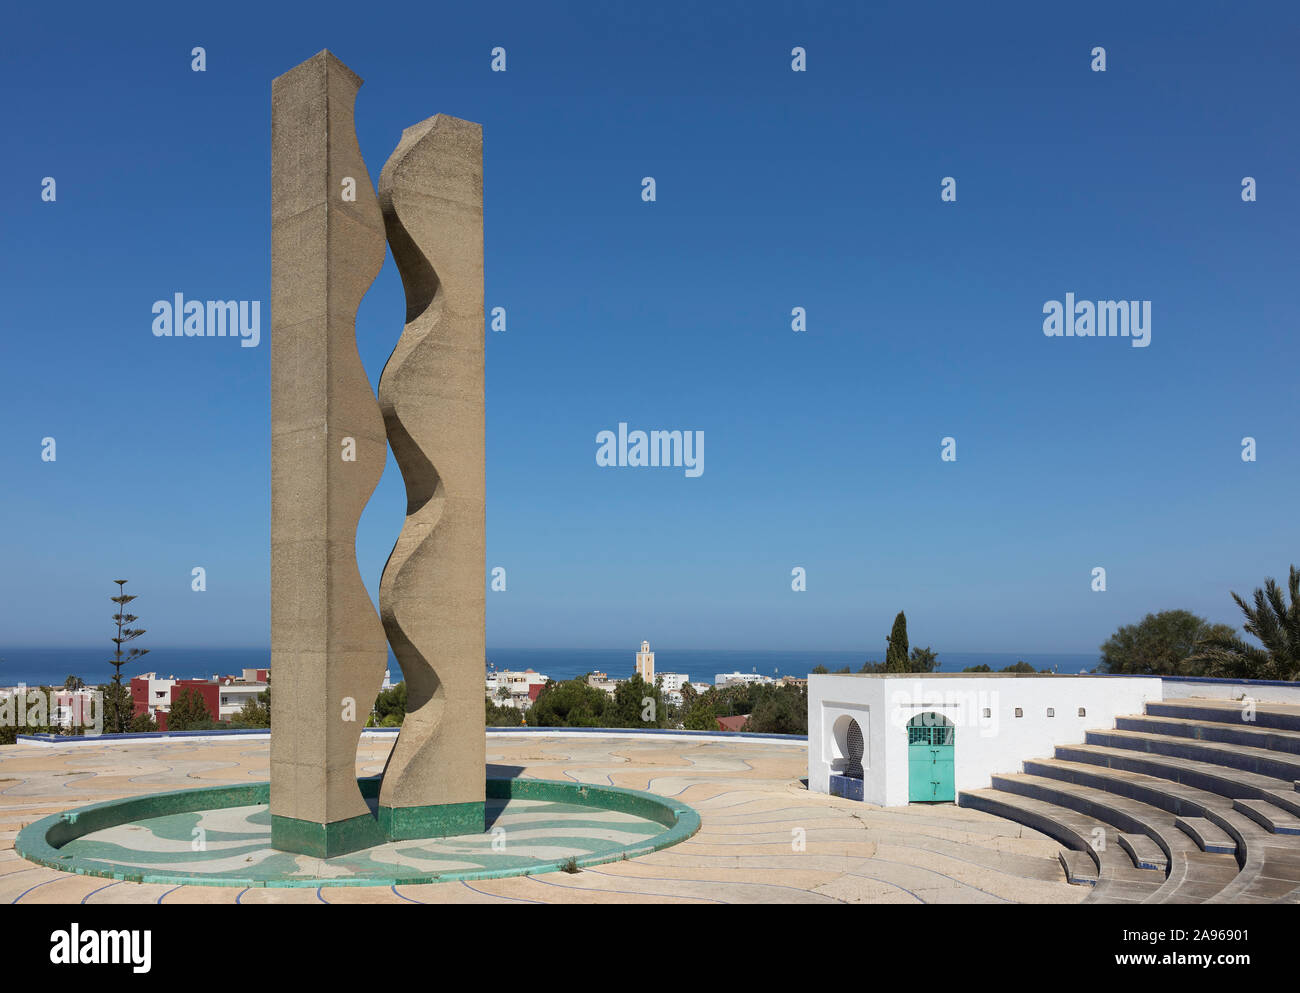 Asilah, Morocco-September 10, 2019: Art in the Kodya Sultan park with the Atlantic ocean at the background in Asilah, Northern Morocco Stock Photo